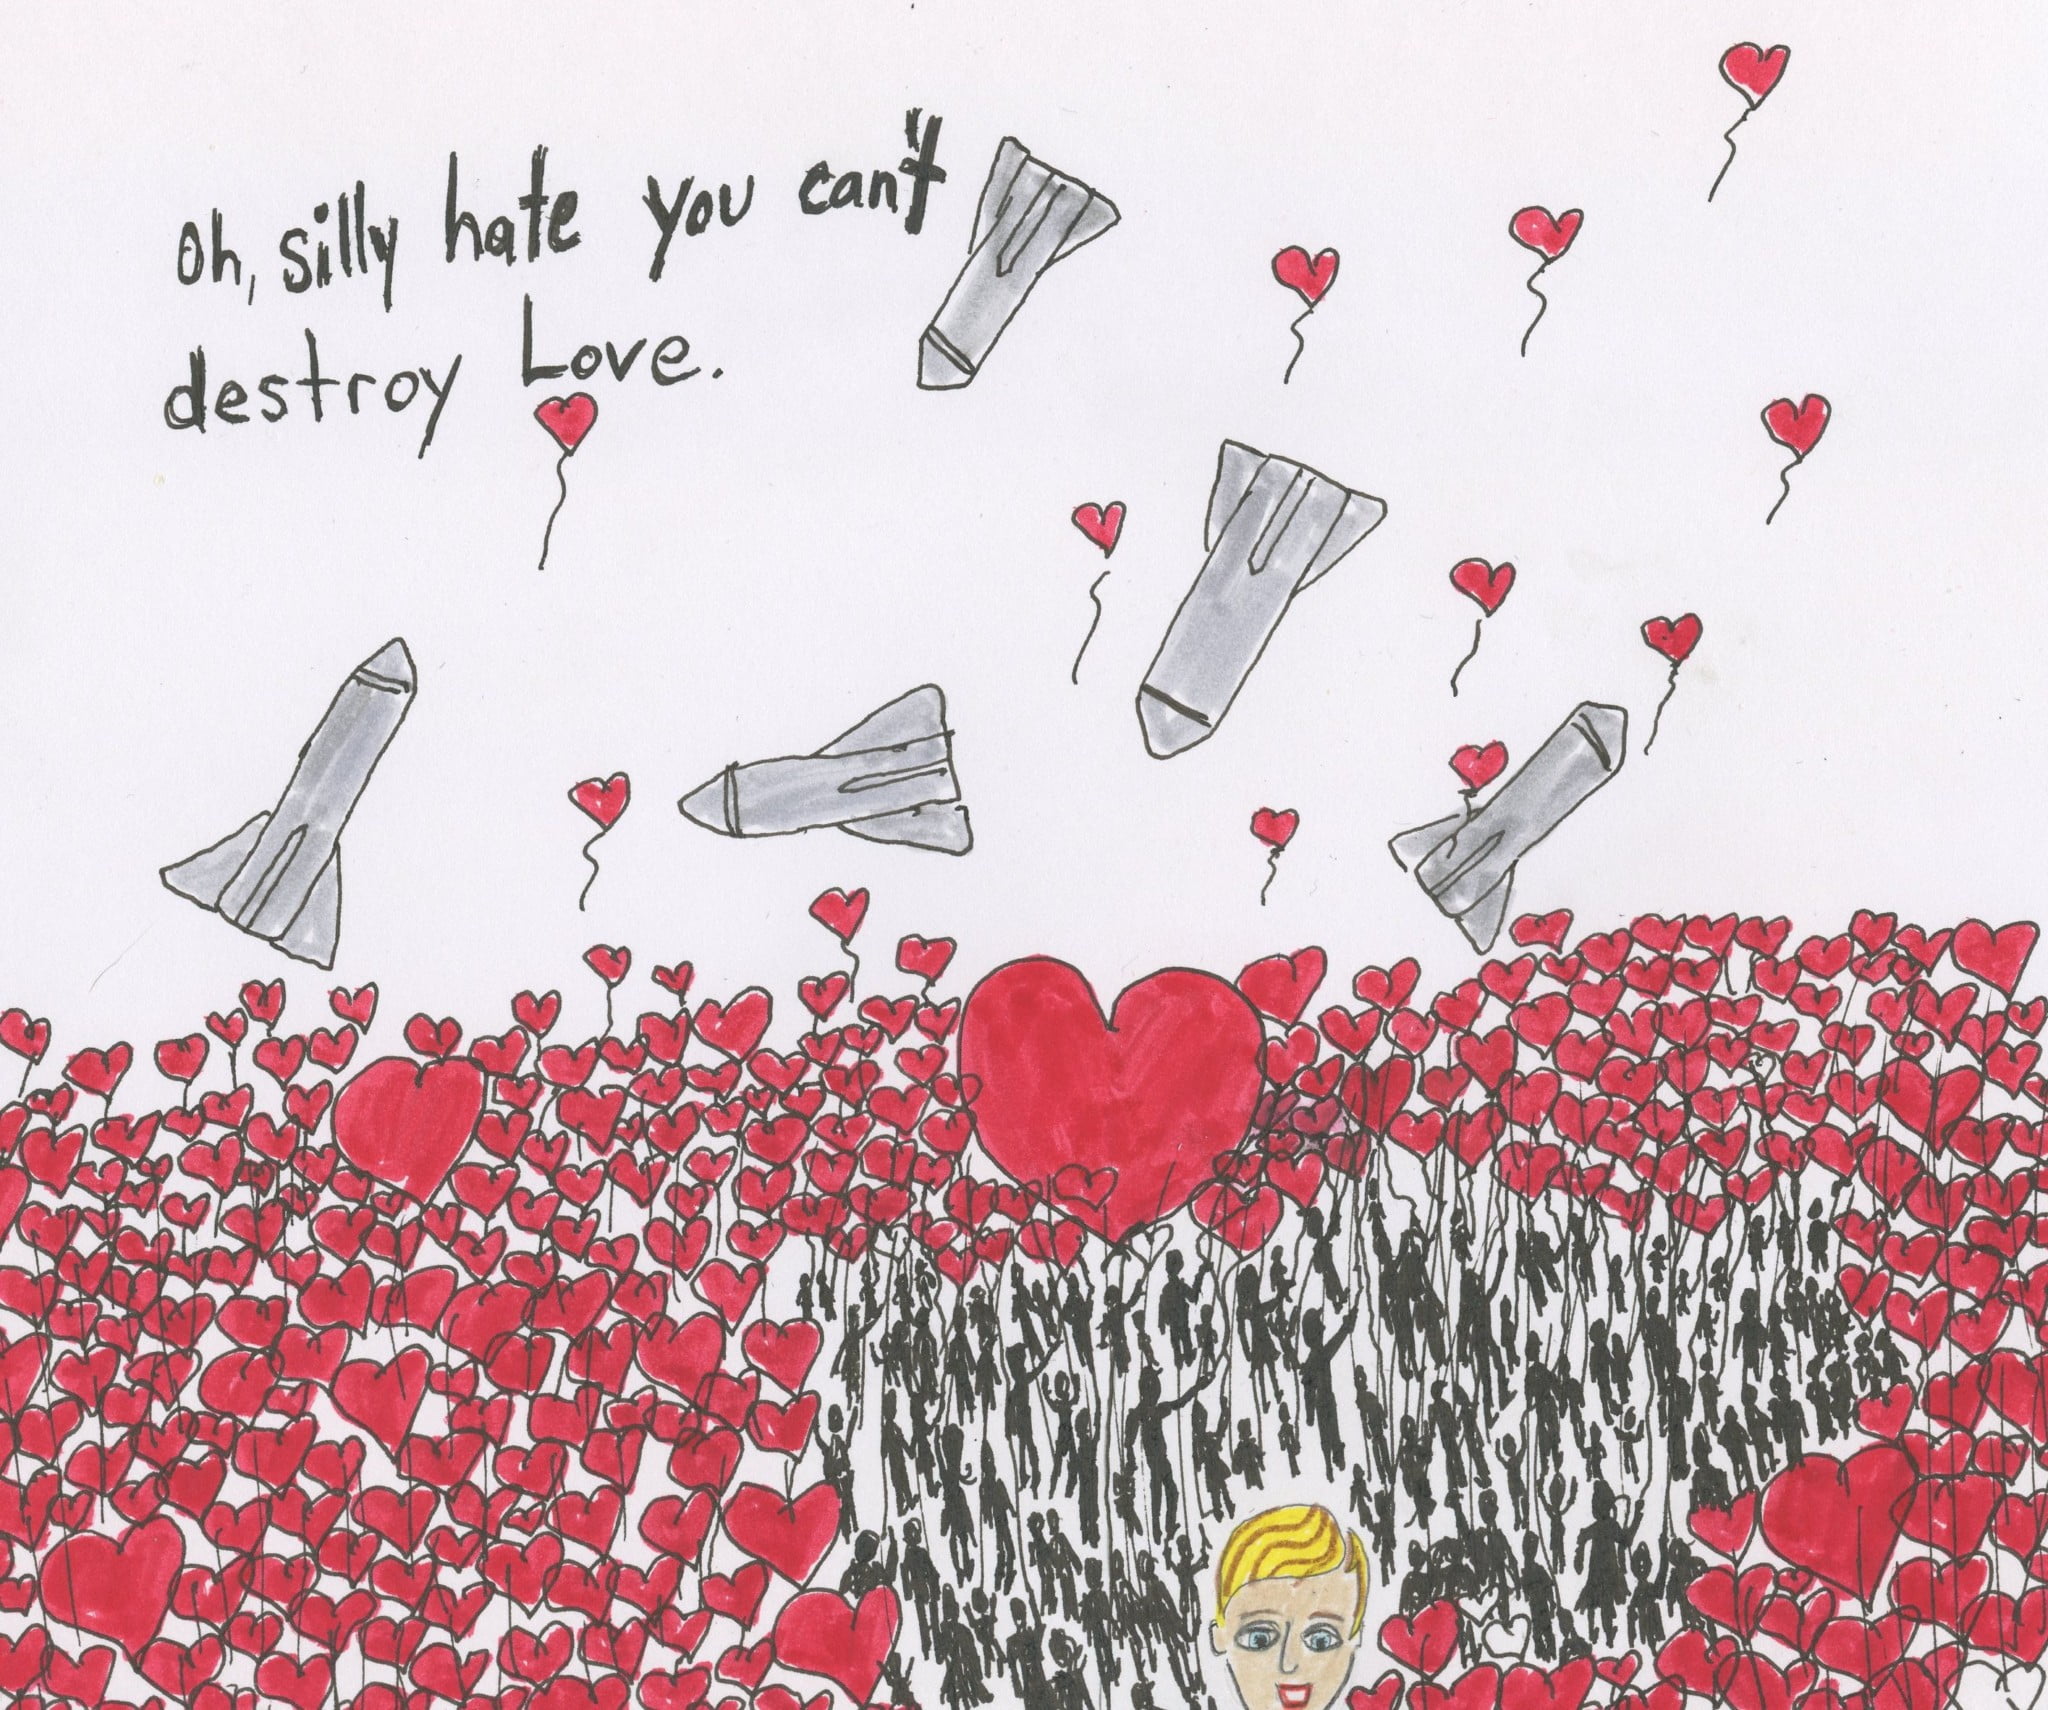 love, hate, destroy, protest